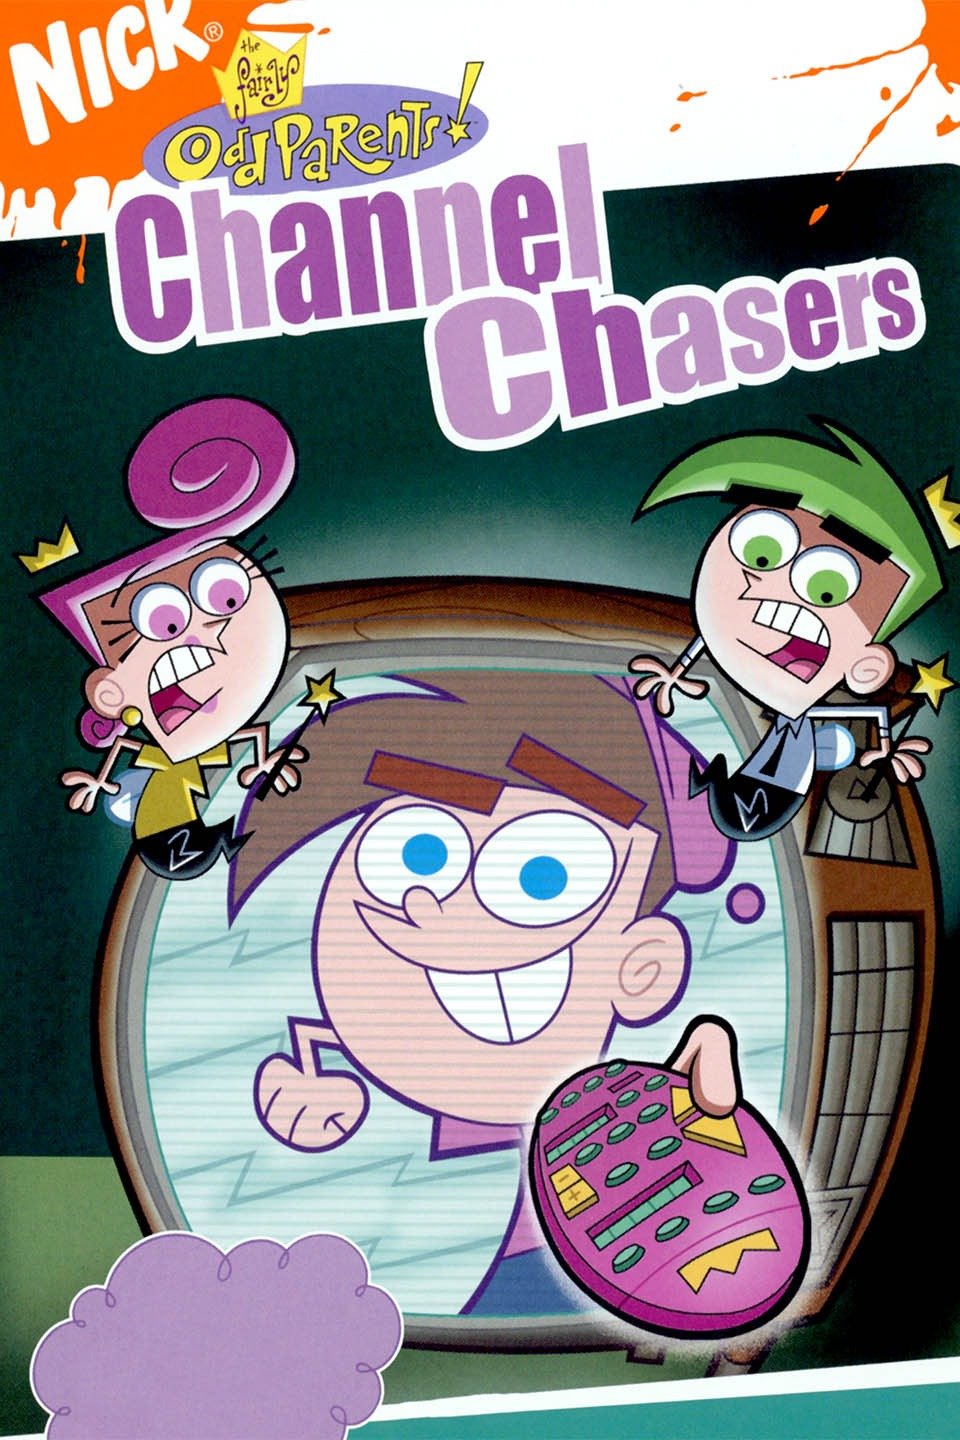 Channel chasers full movie